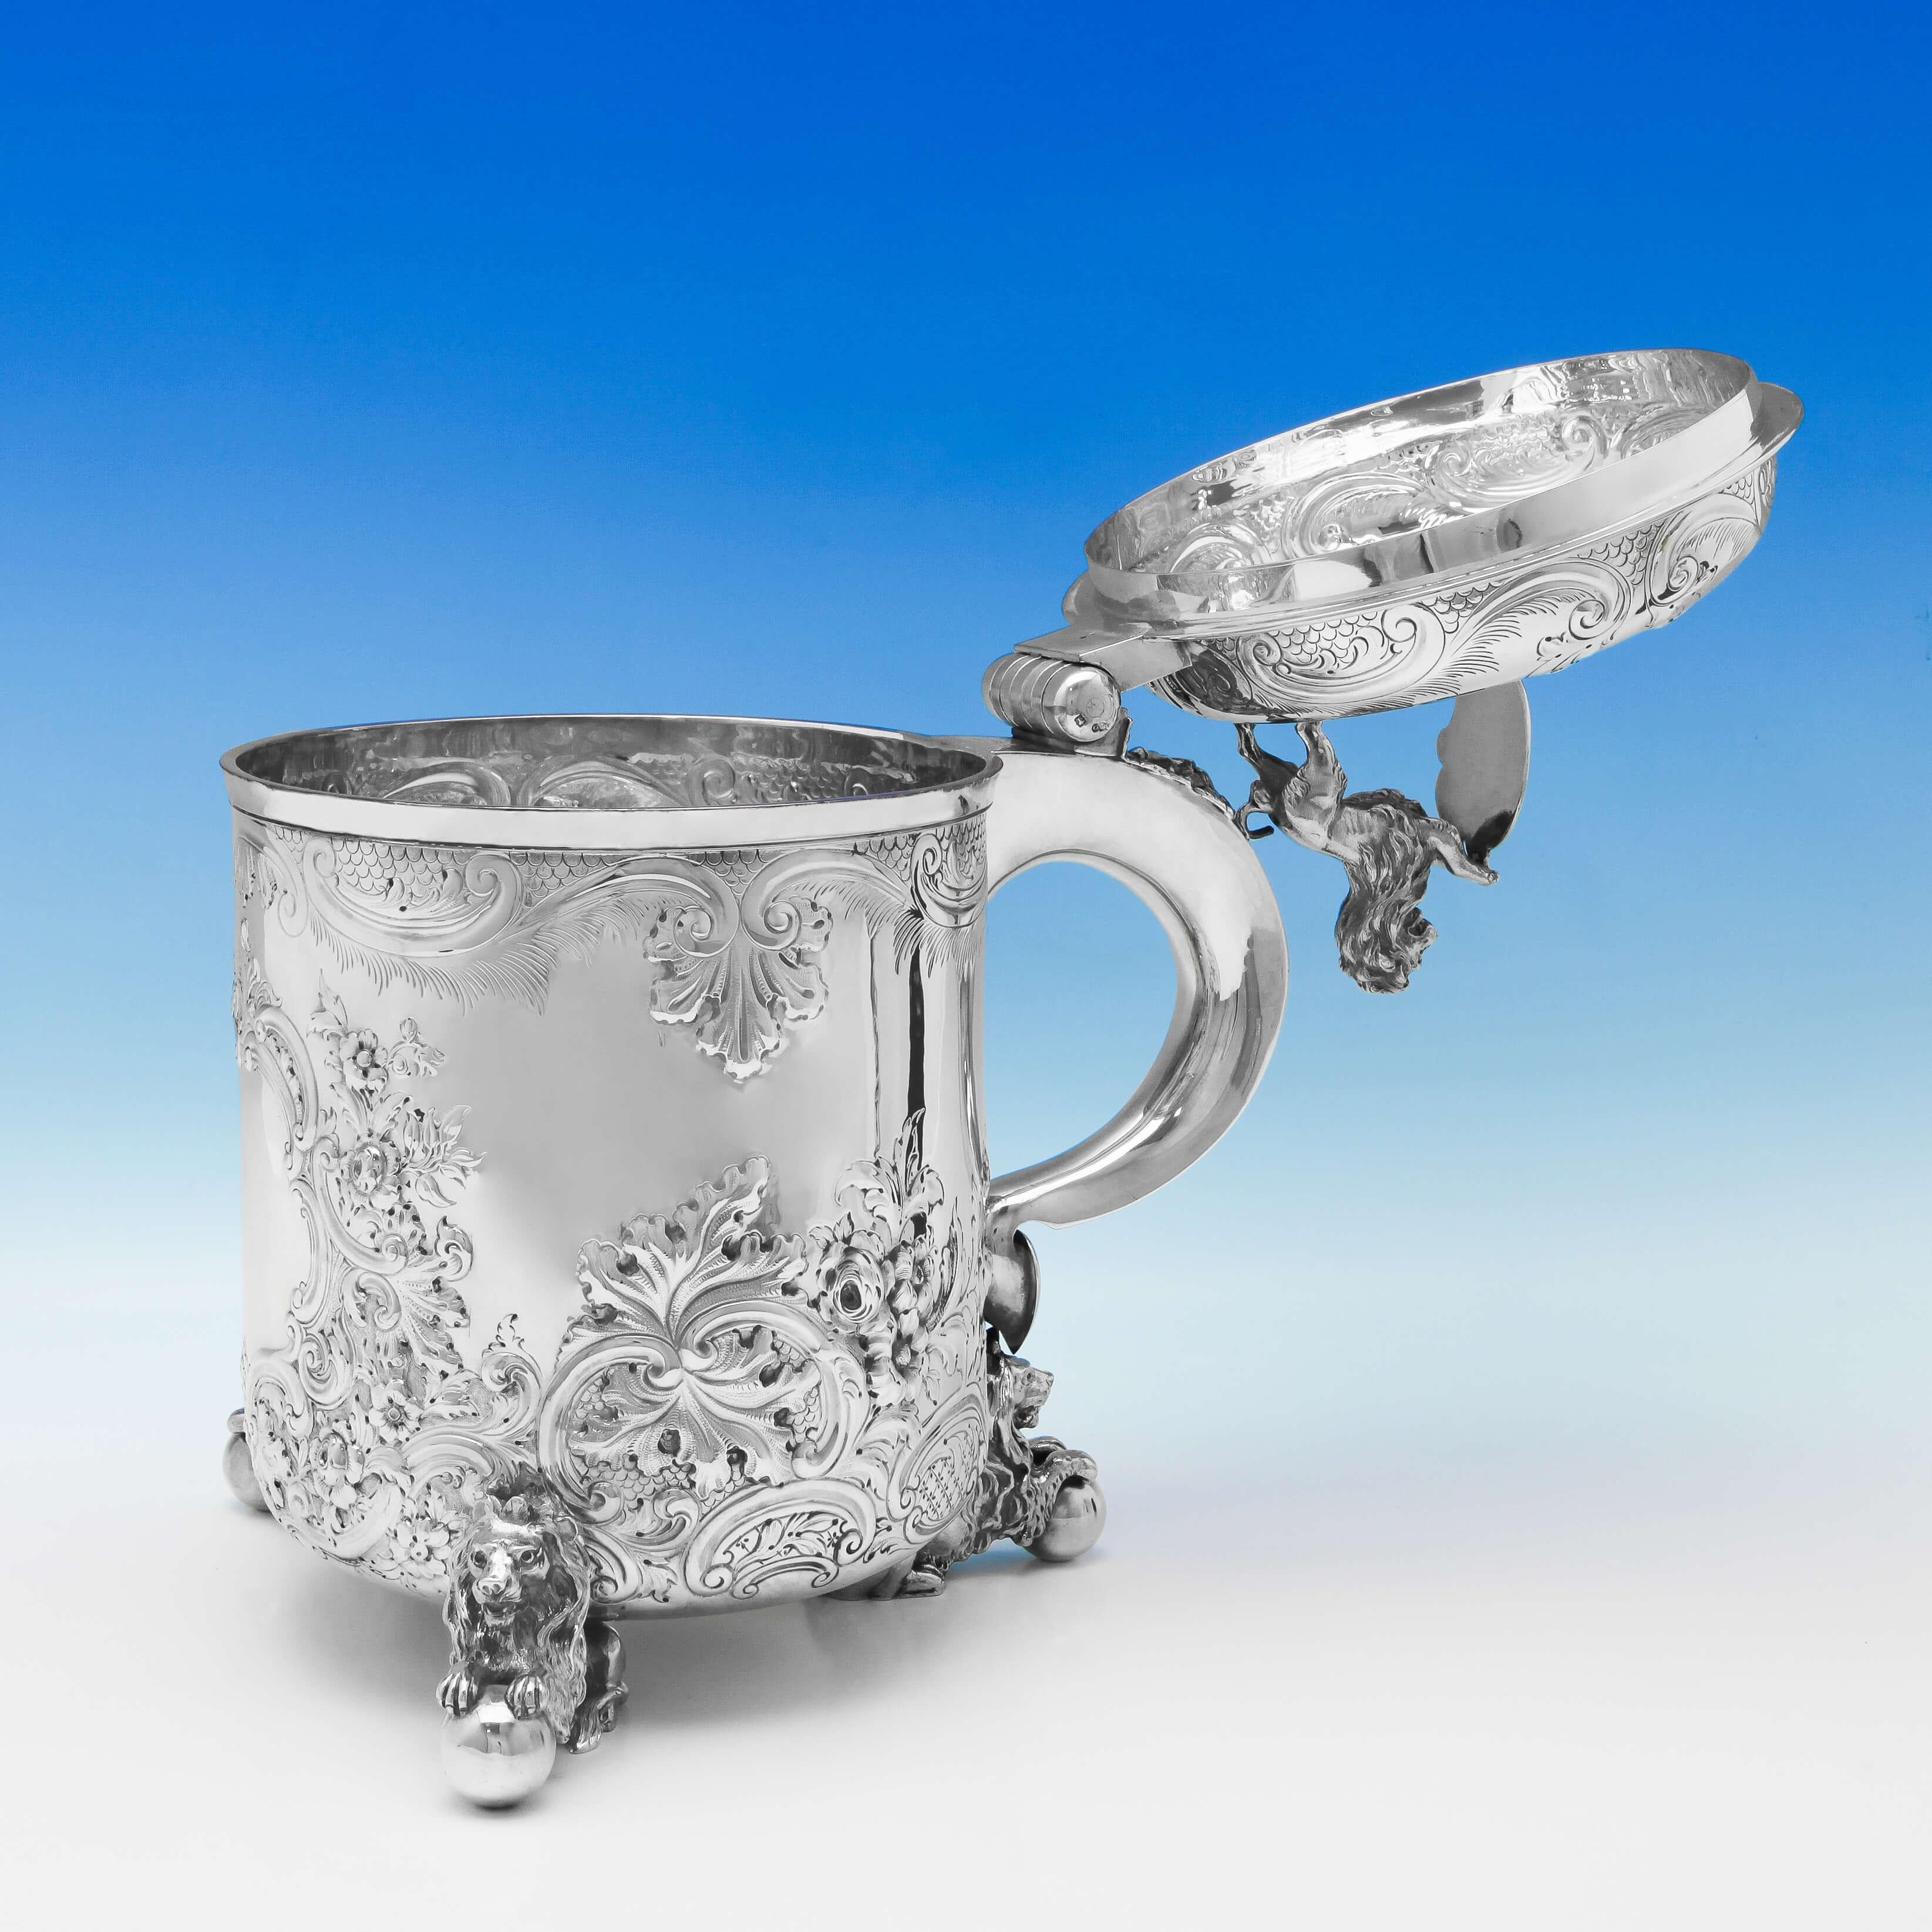 Hallmarked in London in 1900 by Elkington & Co., this impressive, Victorian, antique, sterling silver centrepiece, could be used as a trophy, a wine cooler, or as an oversized beer tankard. The centrepiece stands on thee recumbent lion feet, their